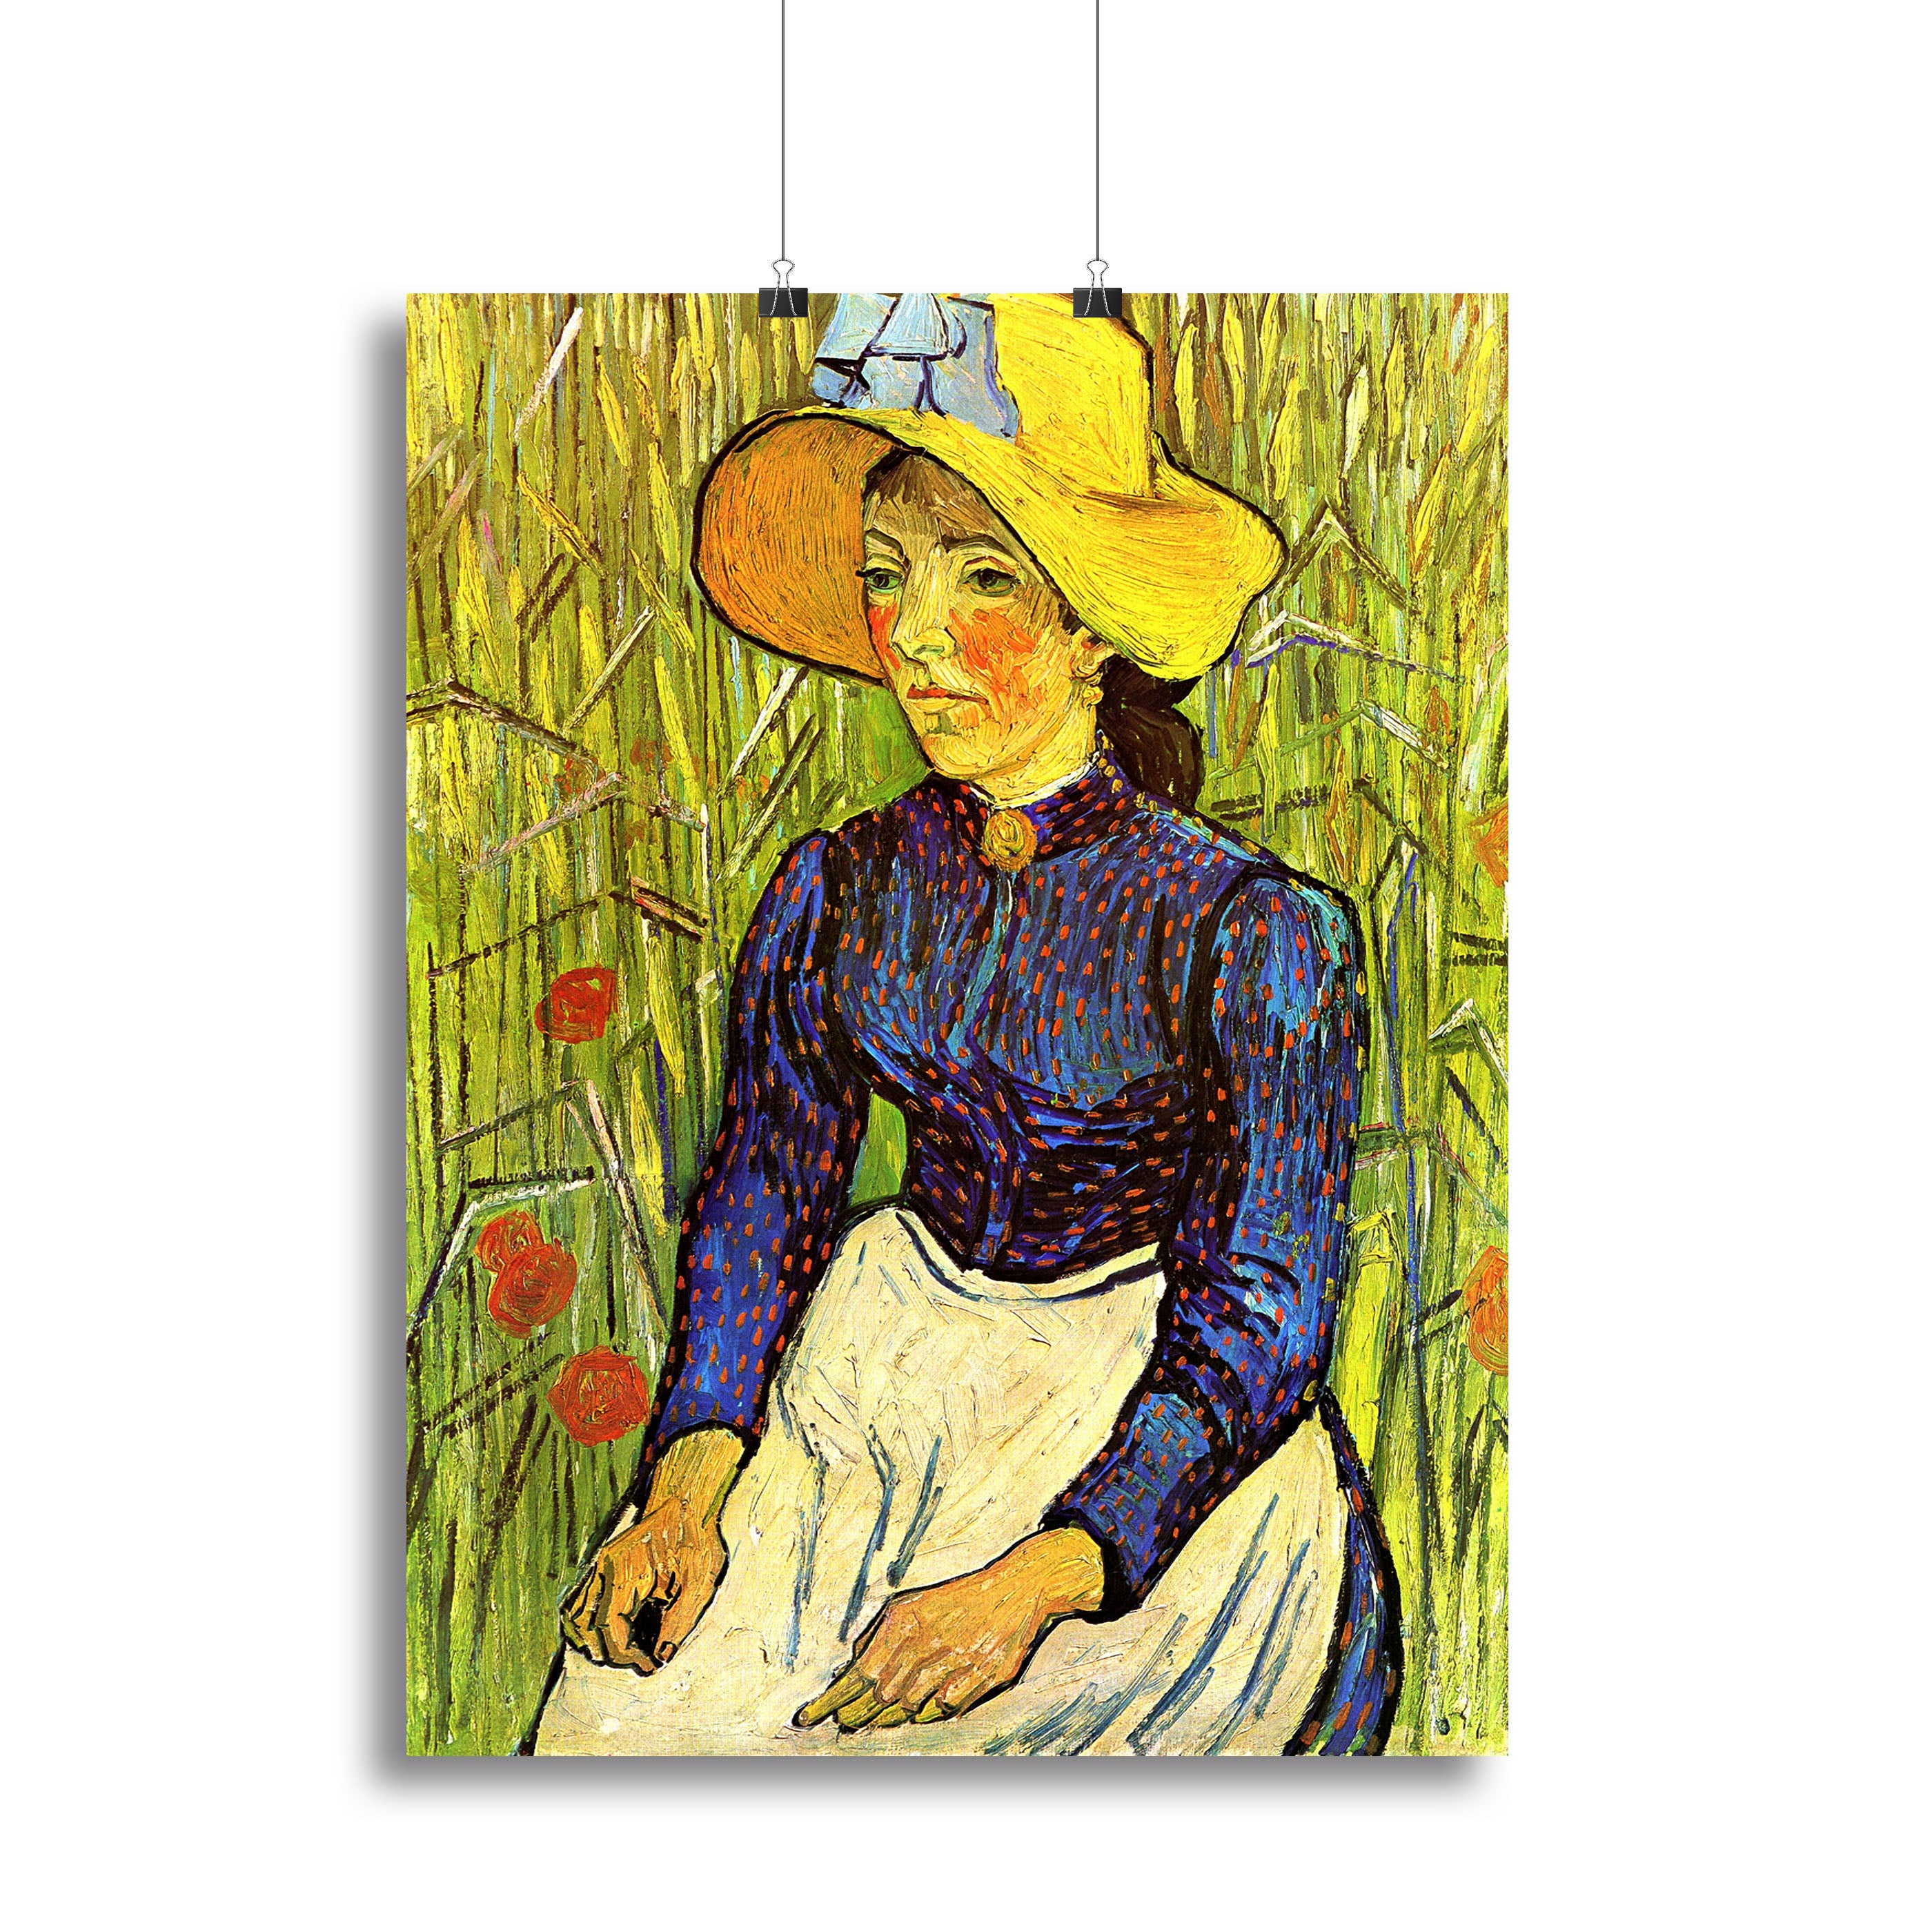 Young Peasant Woman with Straw Hat Sitting in the Wheat by Van Gogh Canvas Print or Poster - Canvas Art Rocks - 2